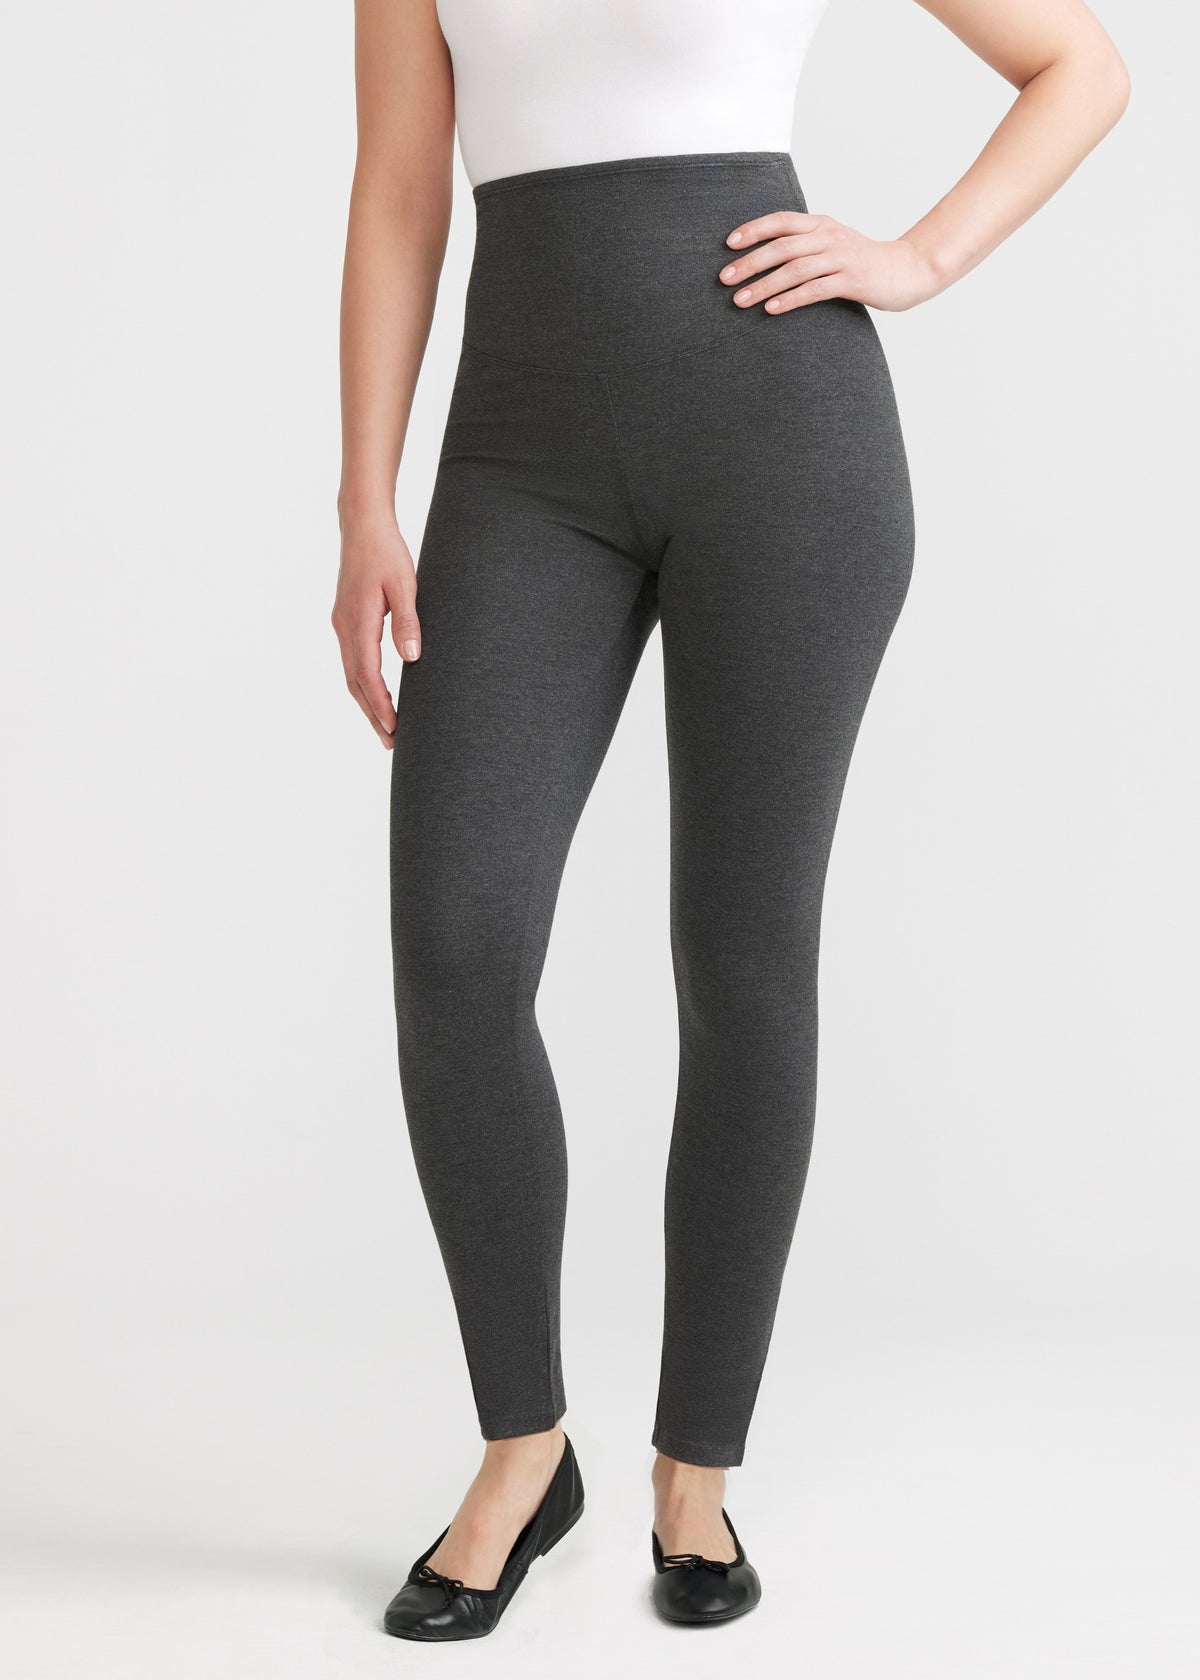 Ponte Shaping Legging from Yummie in Heather Charcoal  - 1